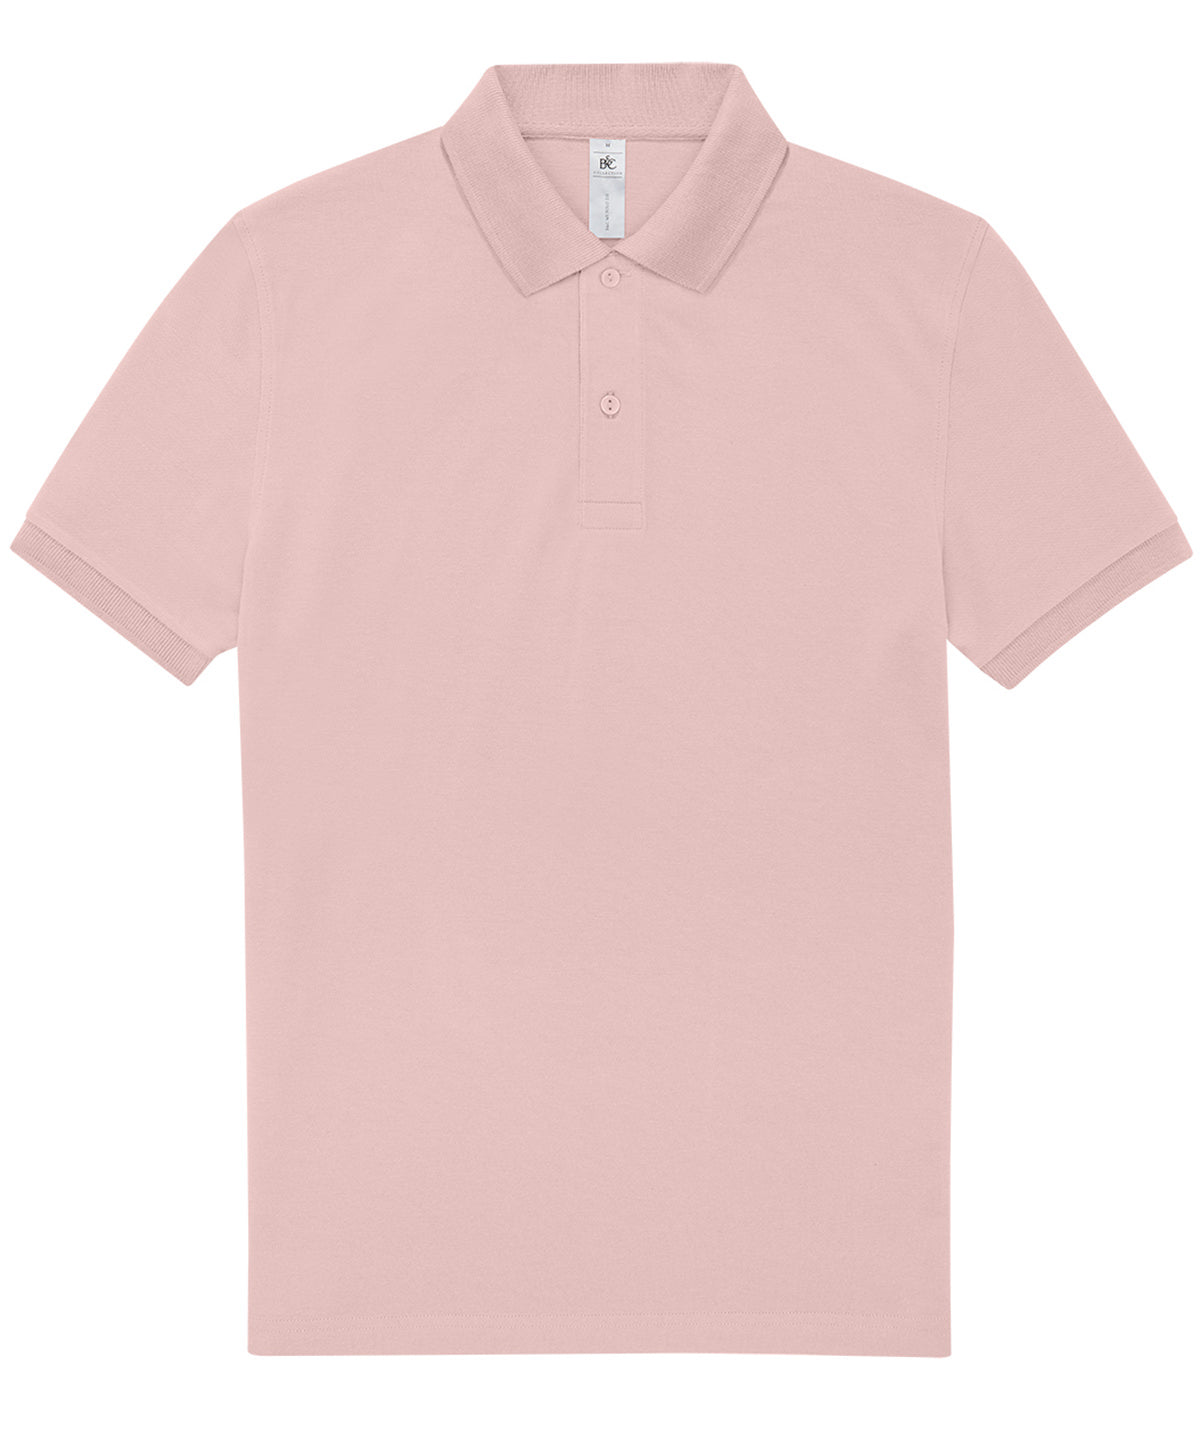 B&C Collection My Polo 210 Blush Pink